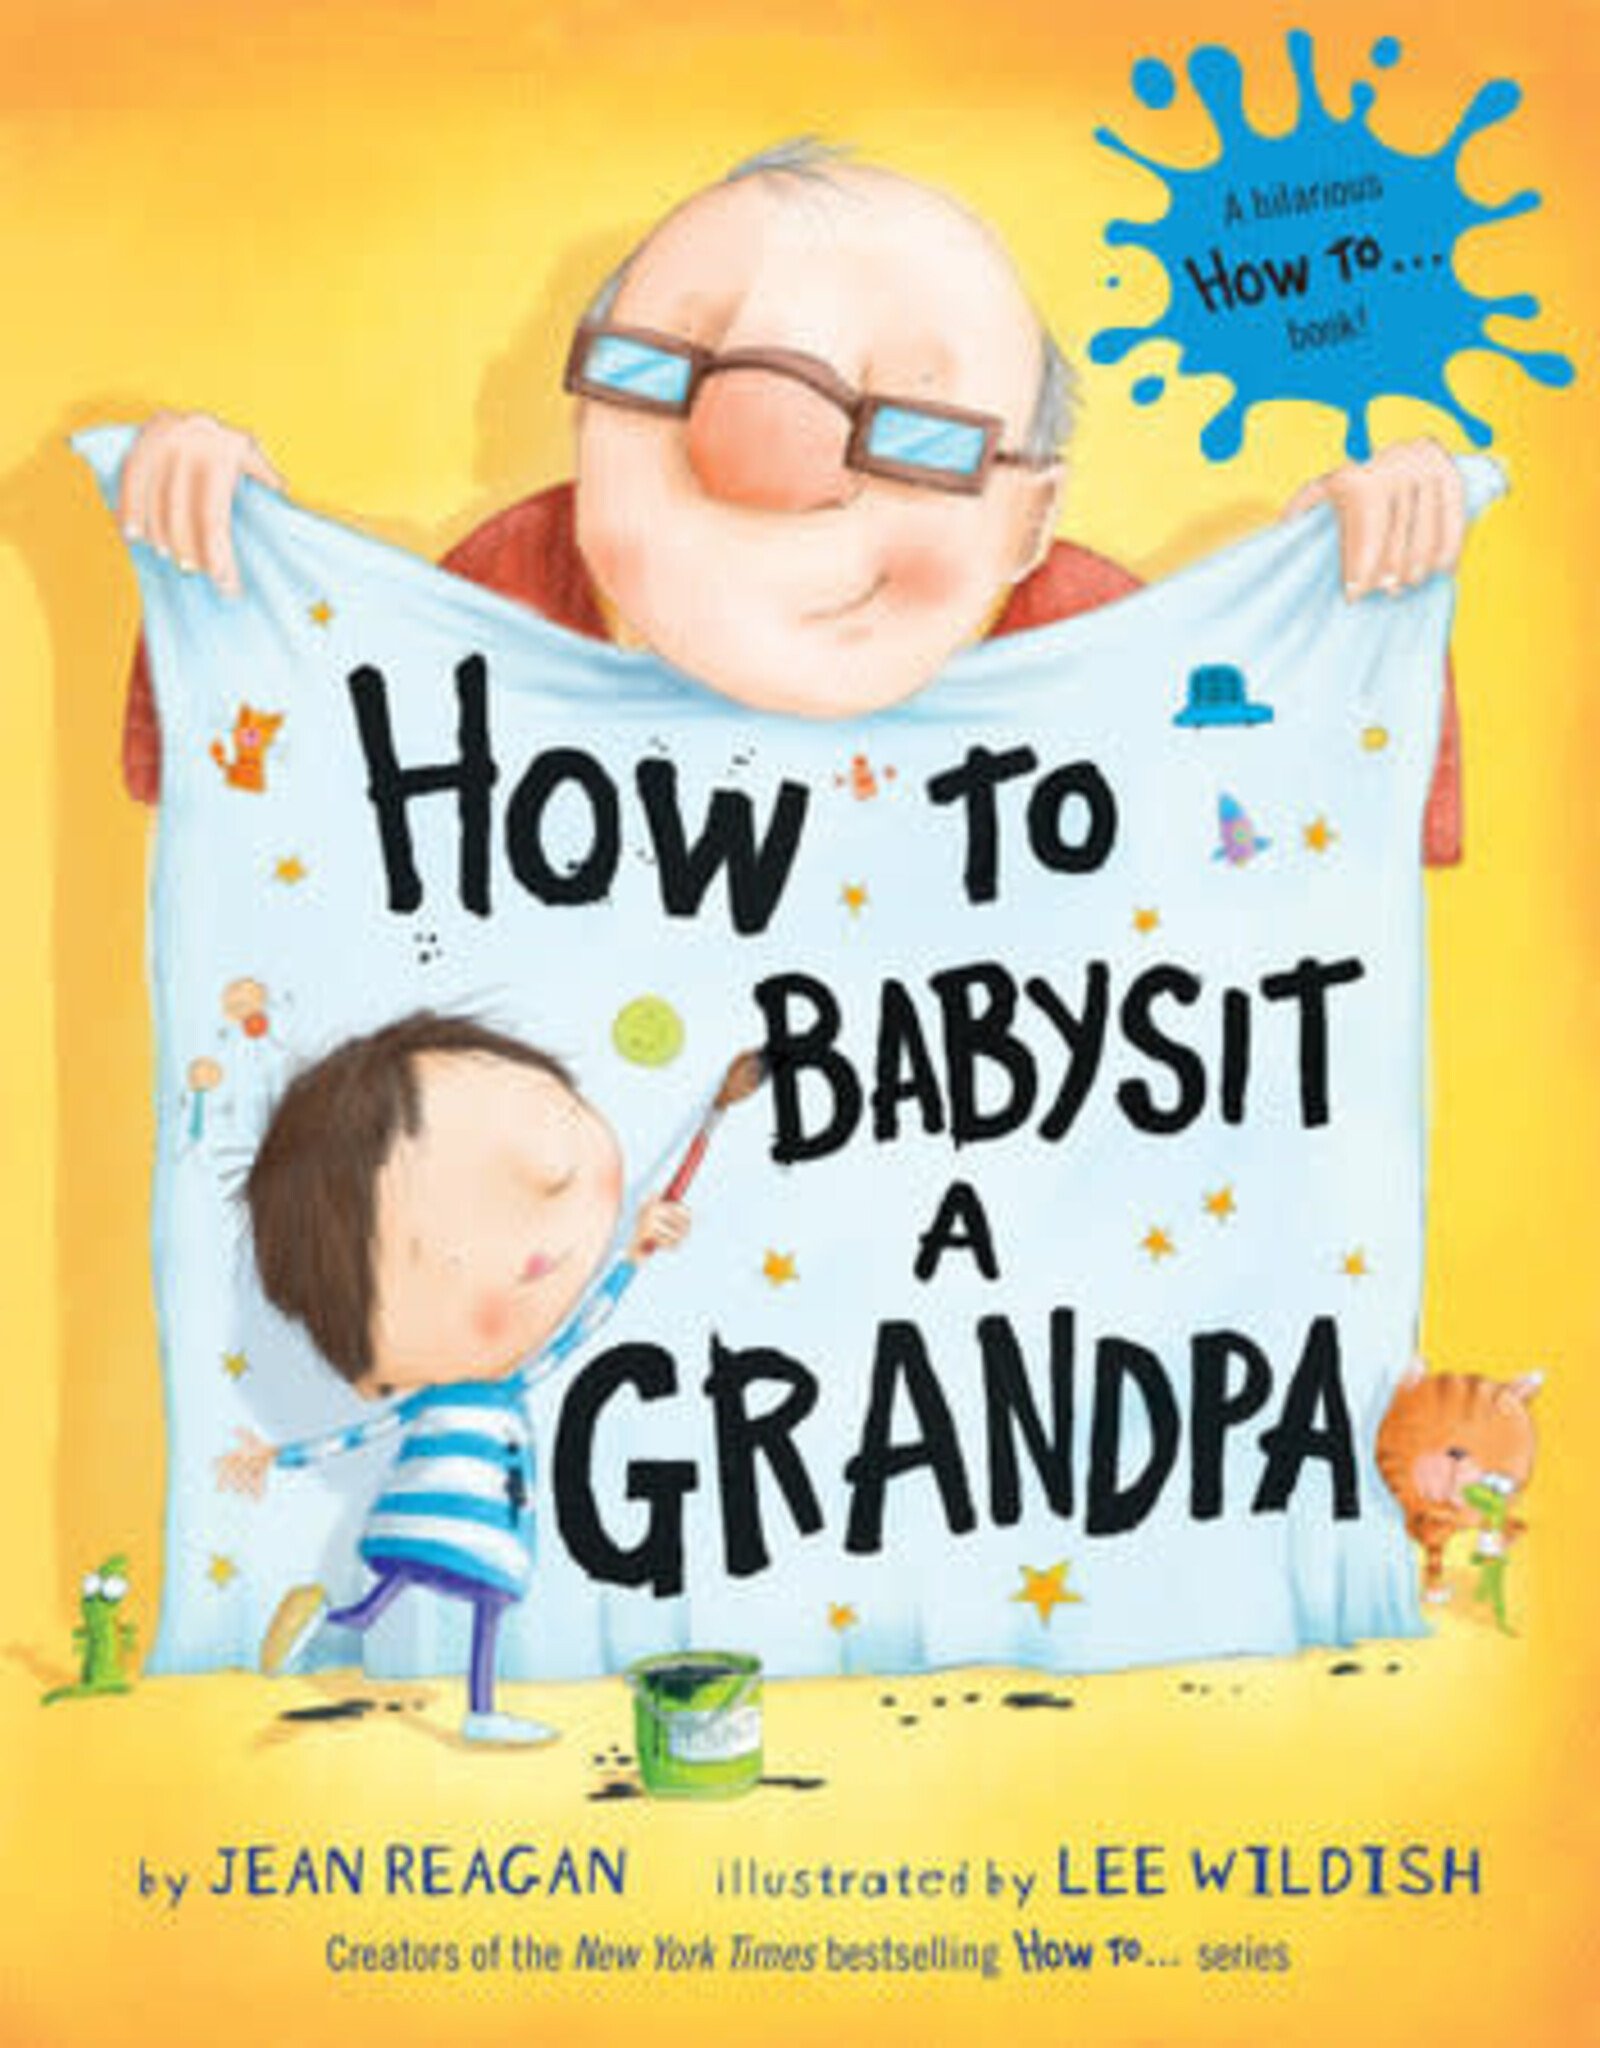 BOOK PUBLISHERS HOW TO BABYSIT A GRANDPA